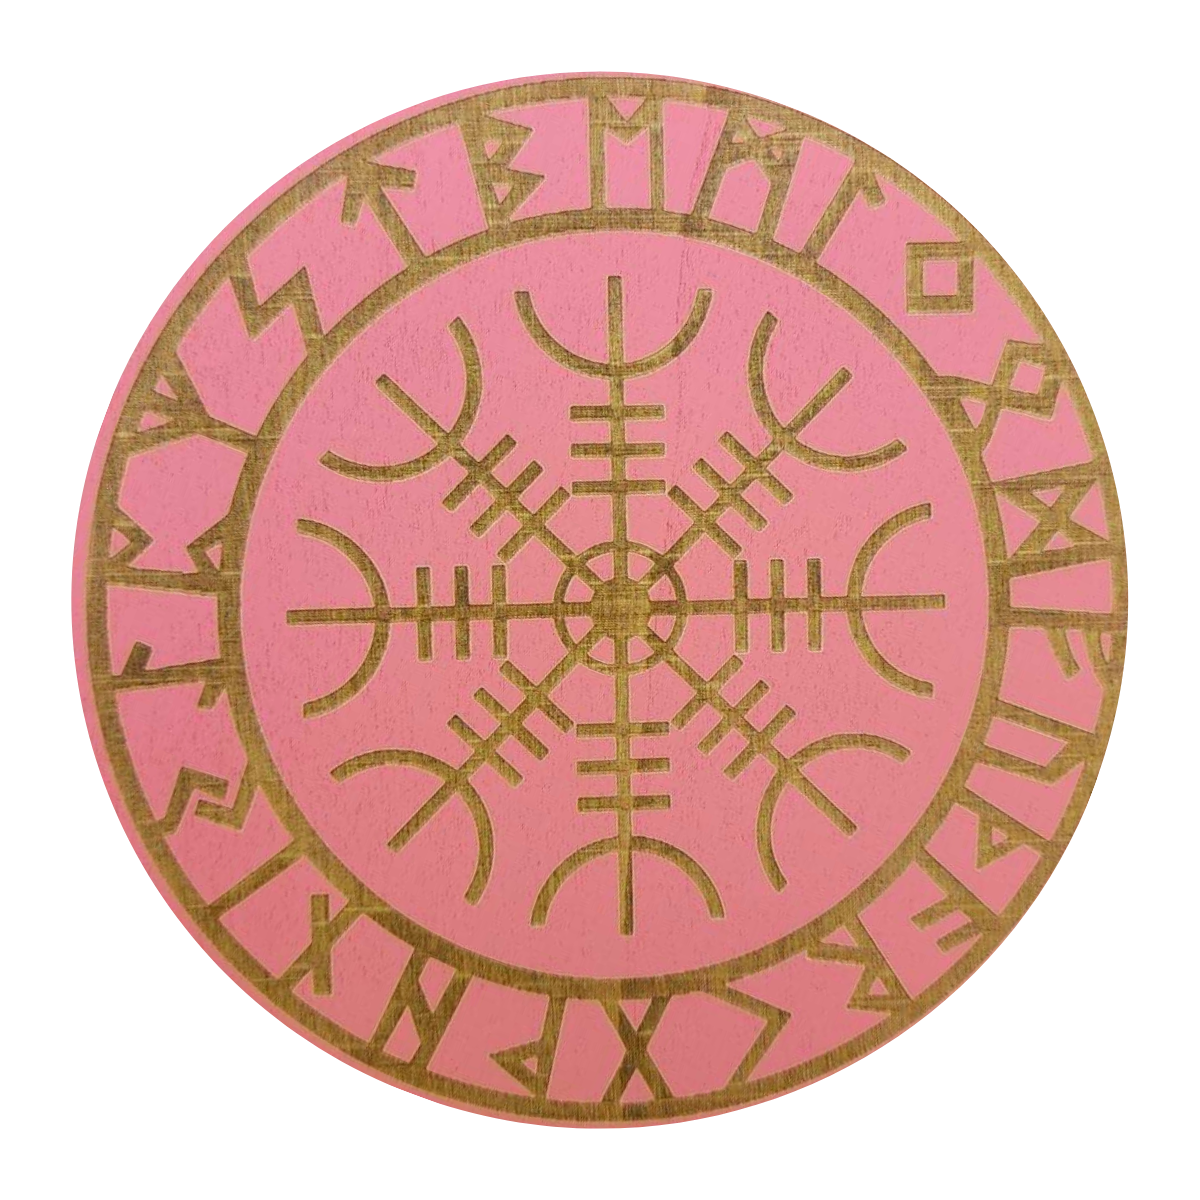 Helm of Awe viking compass / witches crystal grid wooden plate